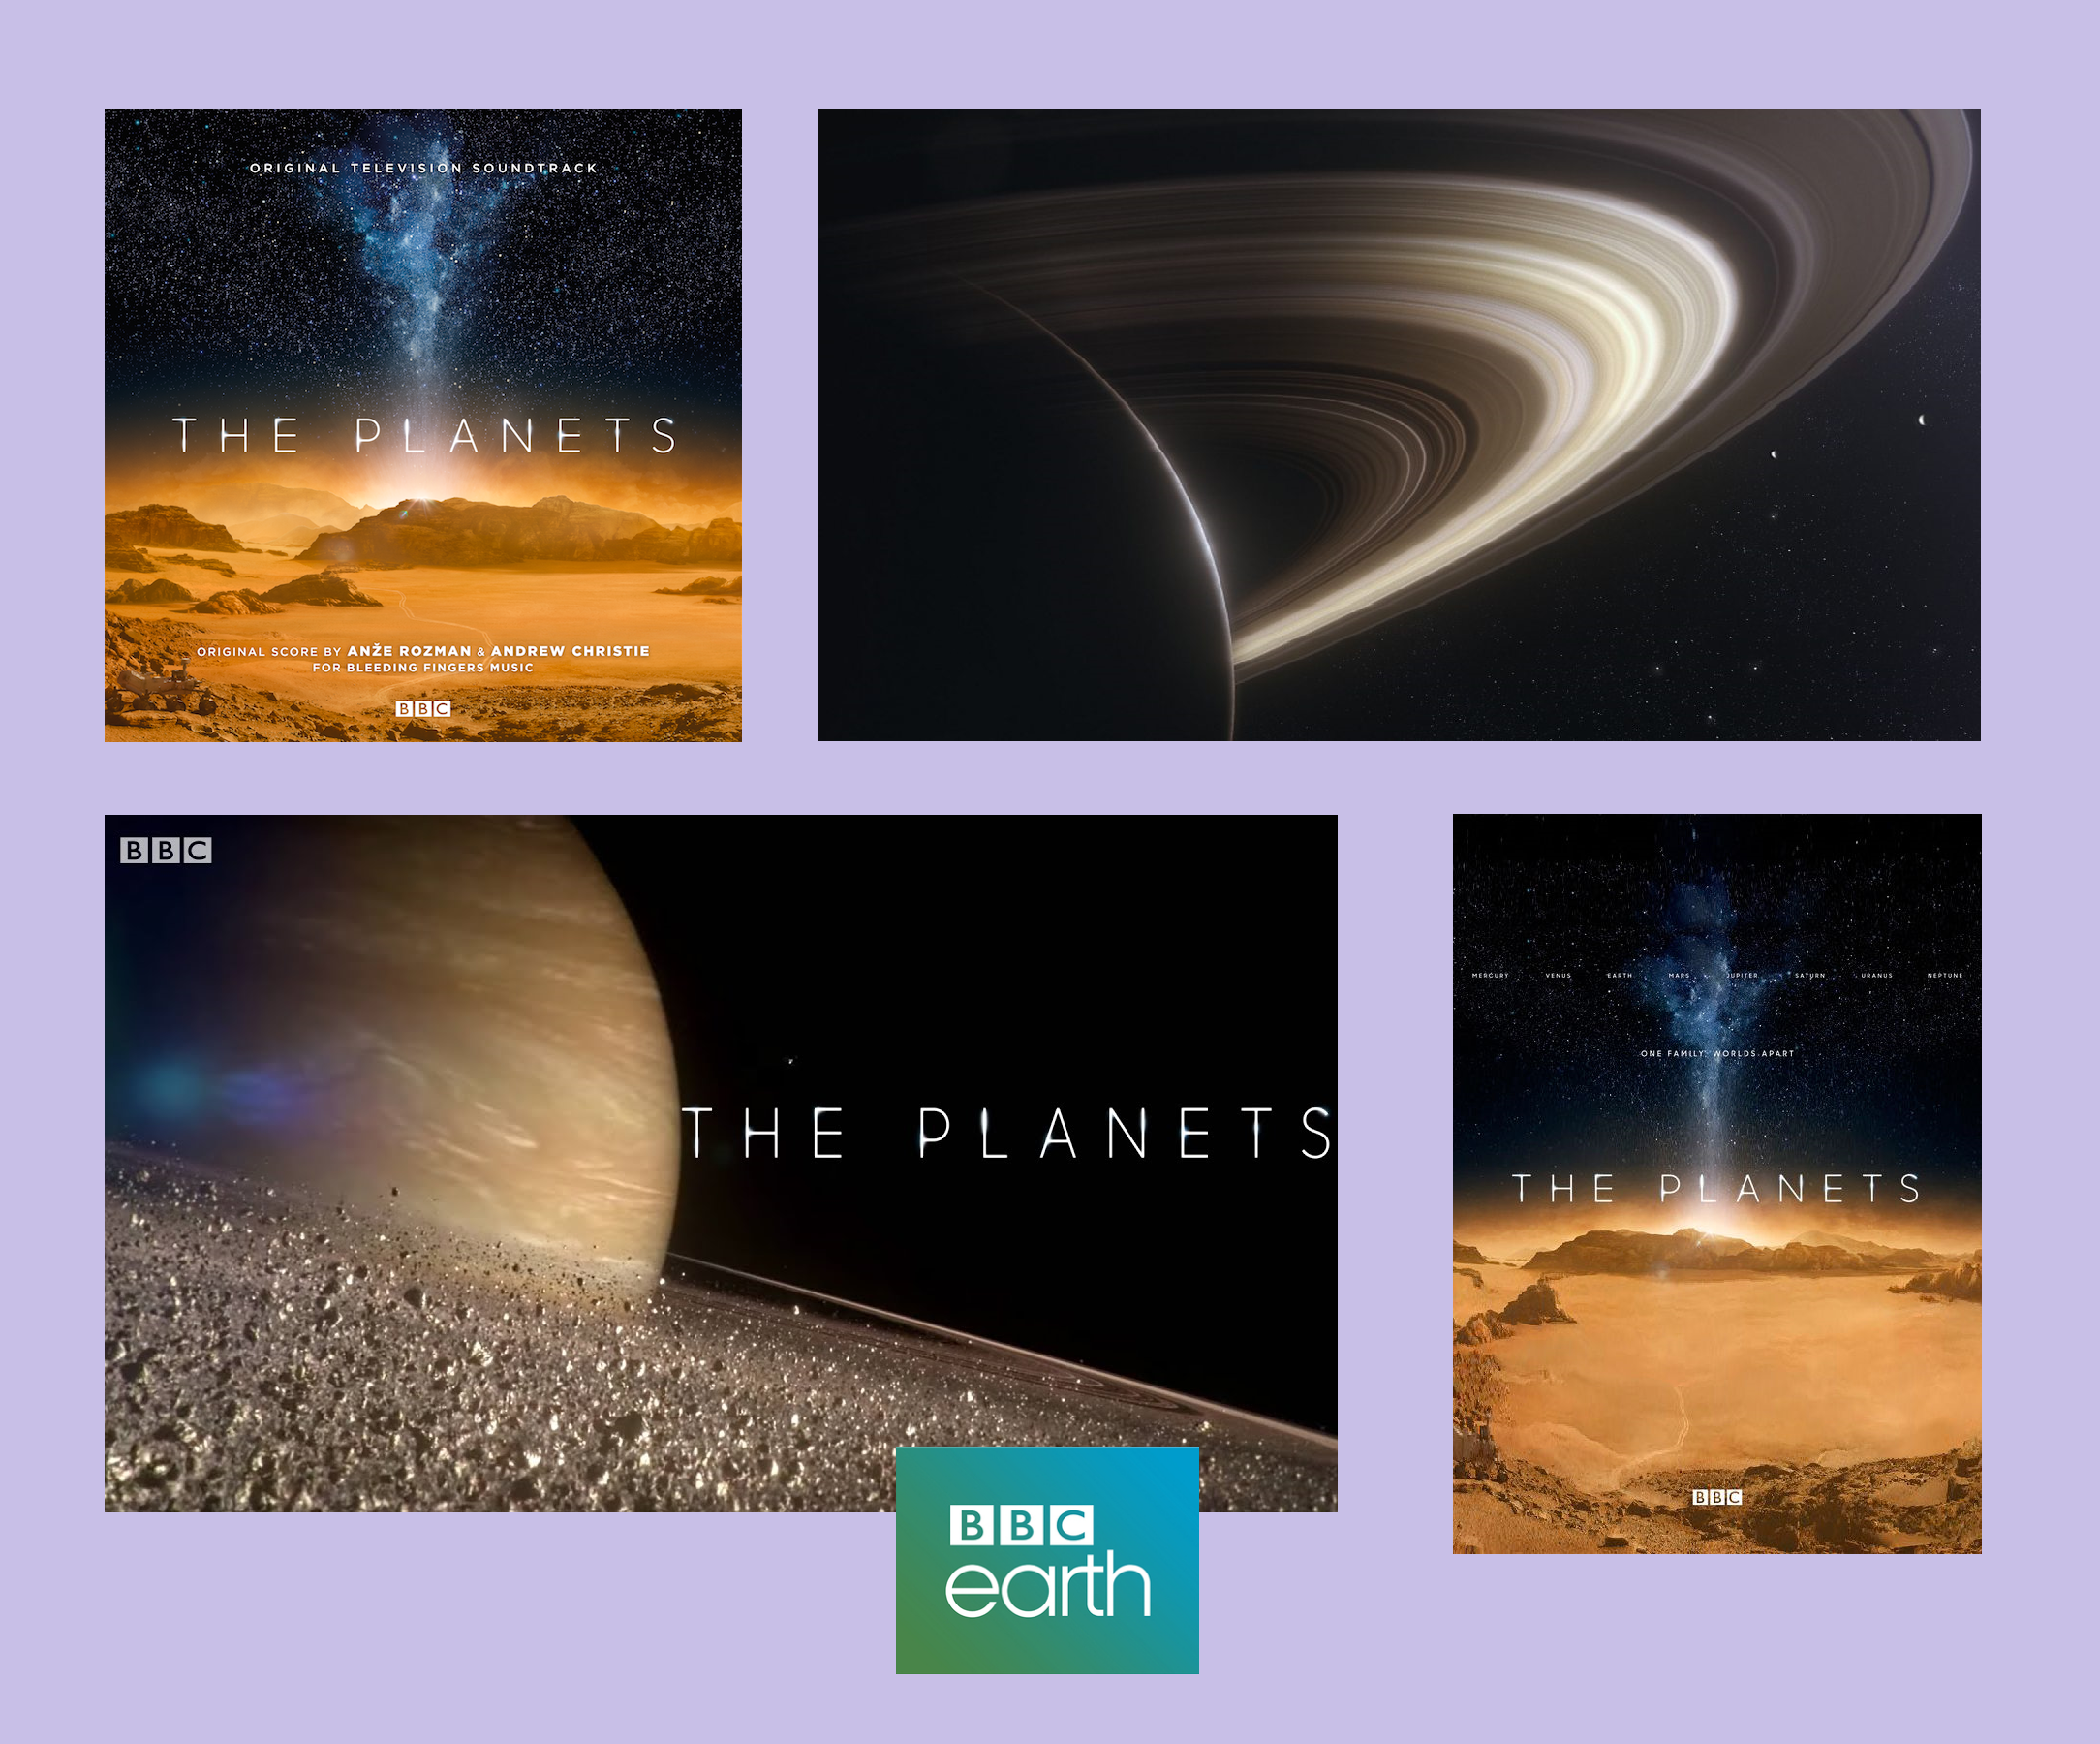 The Planets (BBC Earth 2019)